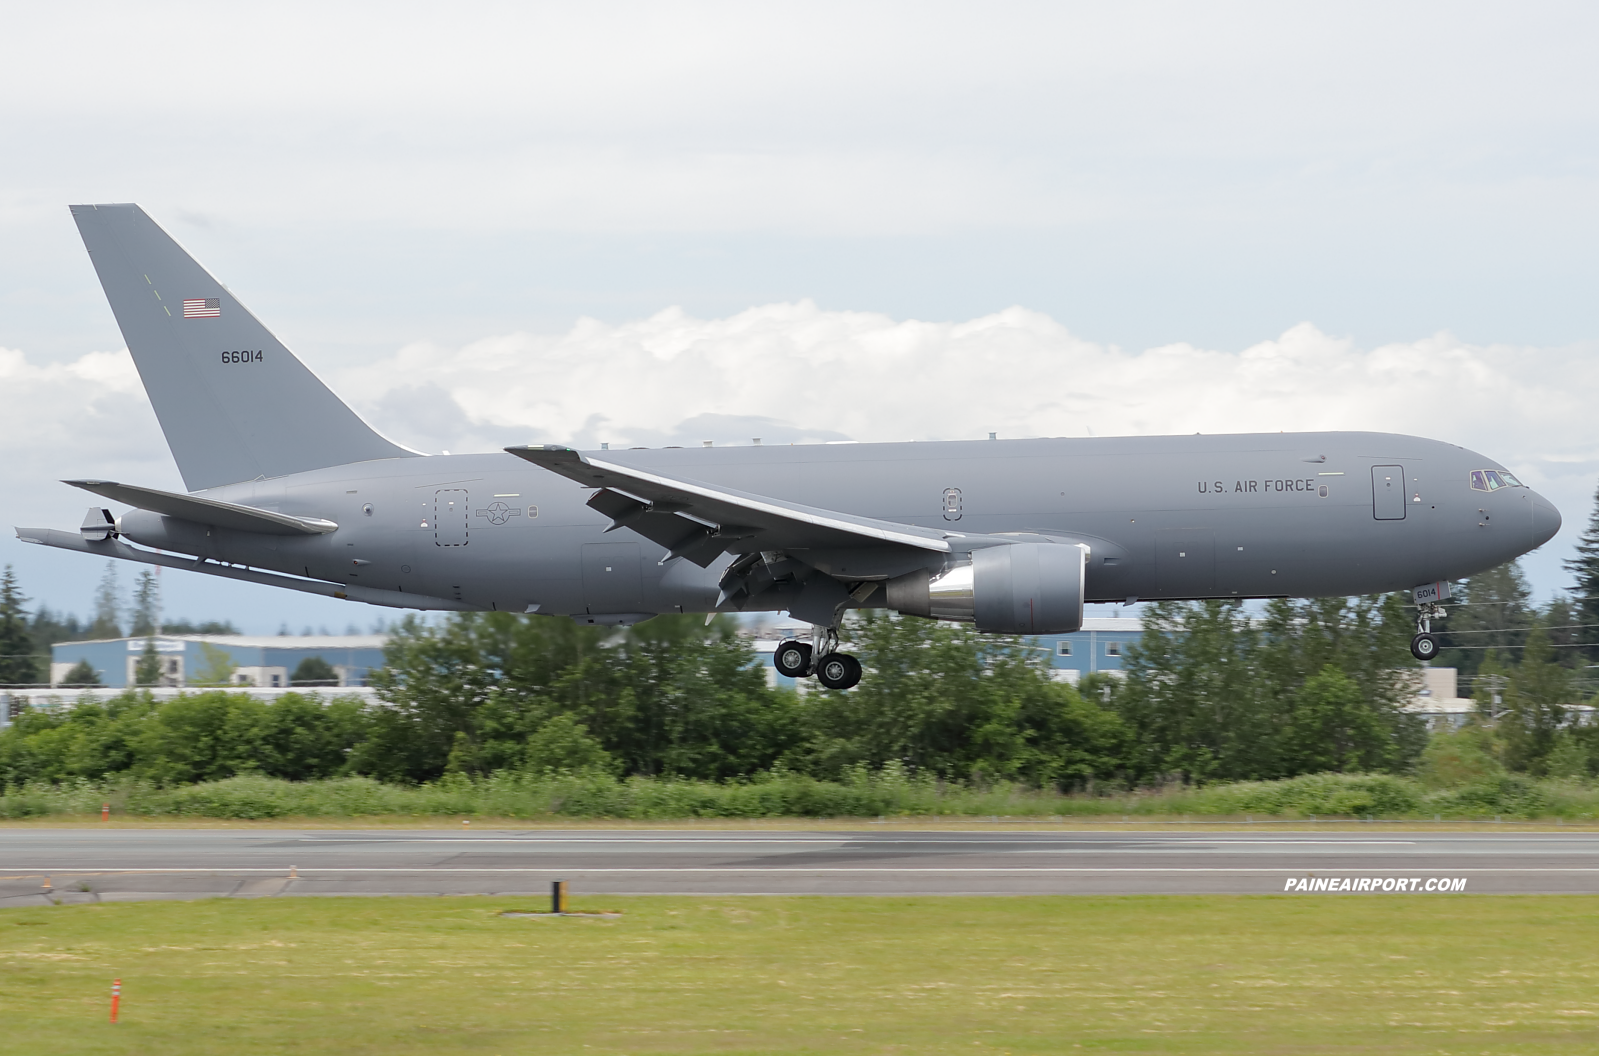 KC-46A 16-46014 at KPAE Paine Field